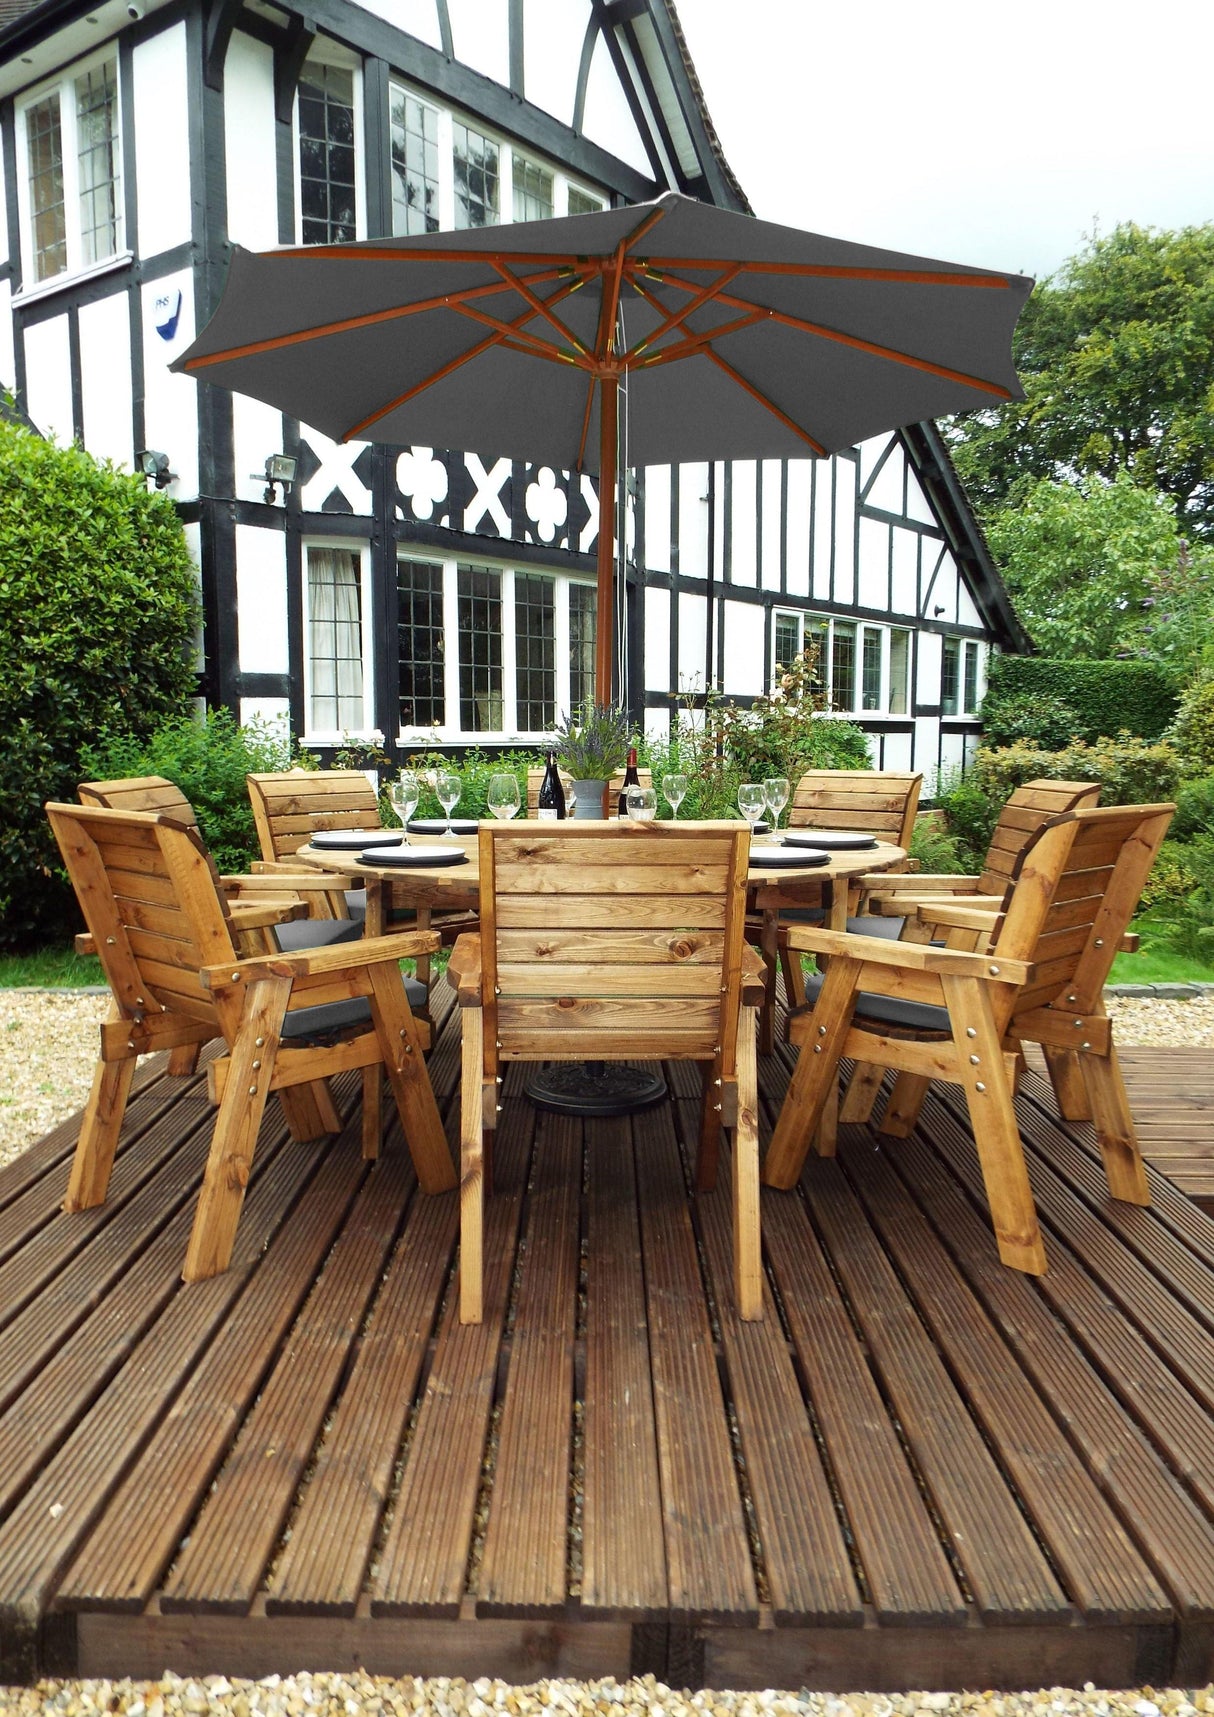 Charles Taylor Eight Seater Circular Table Set with Cushions and Parasol